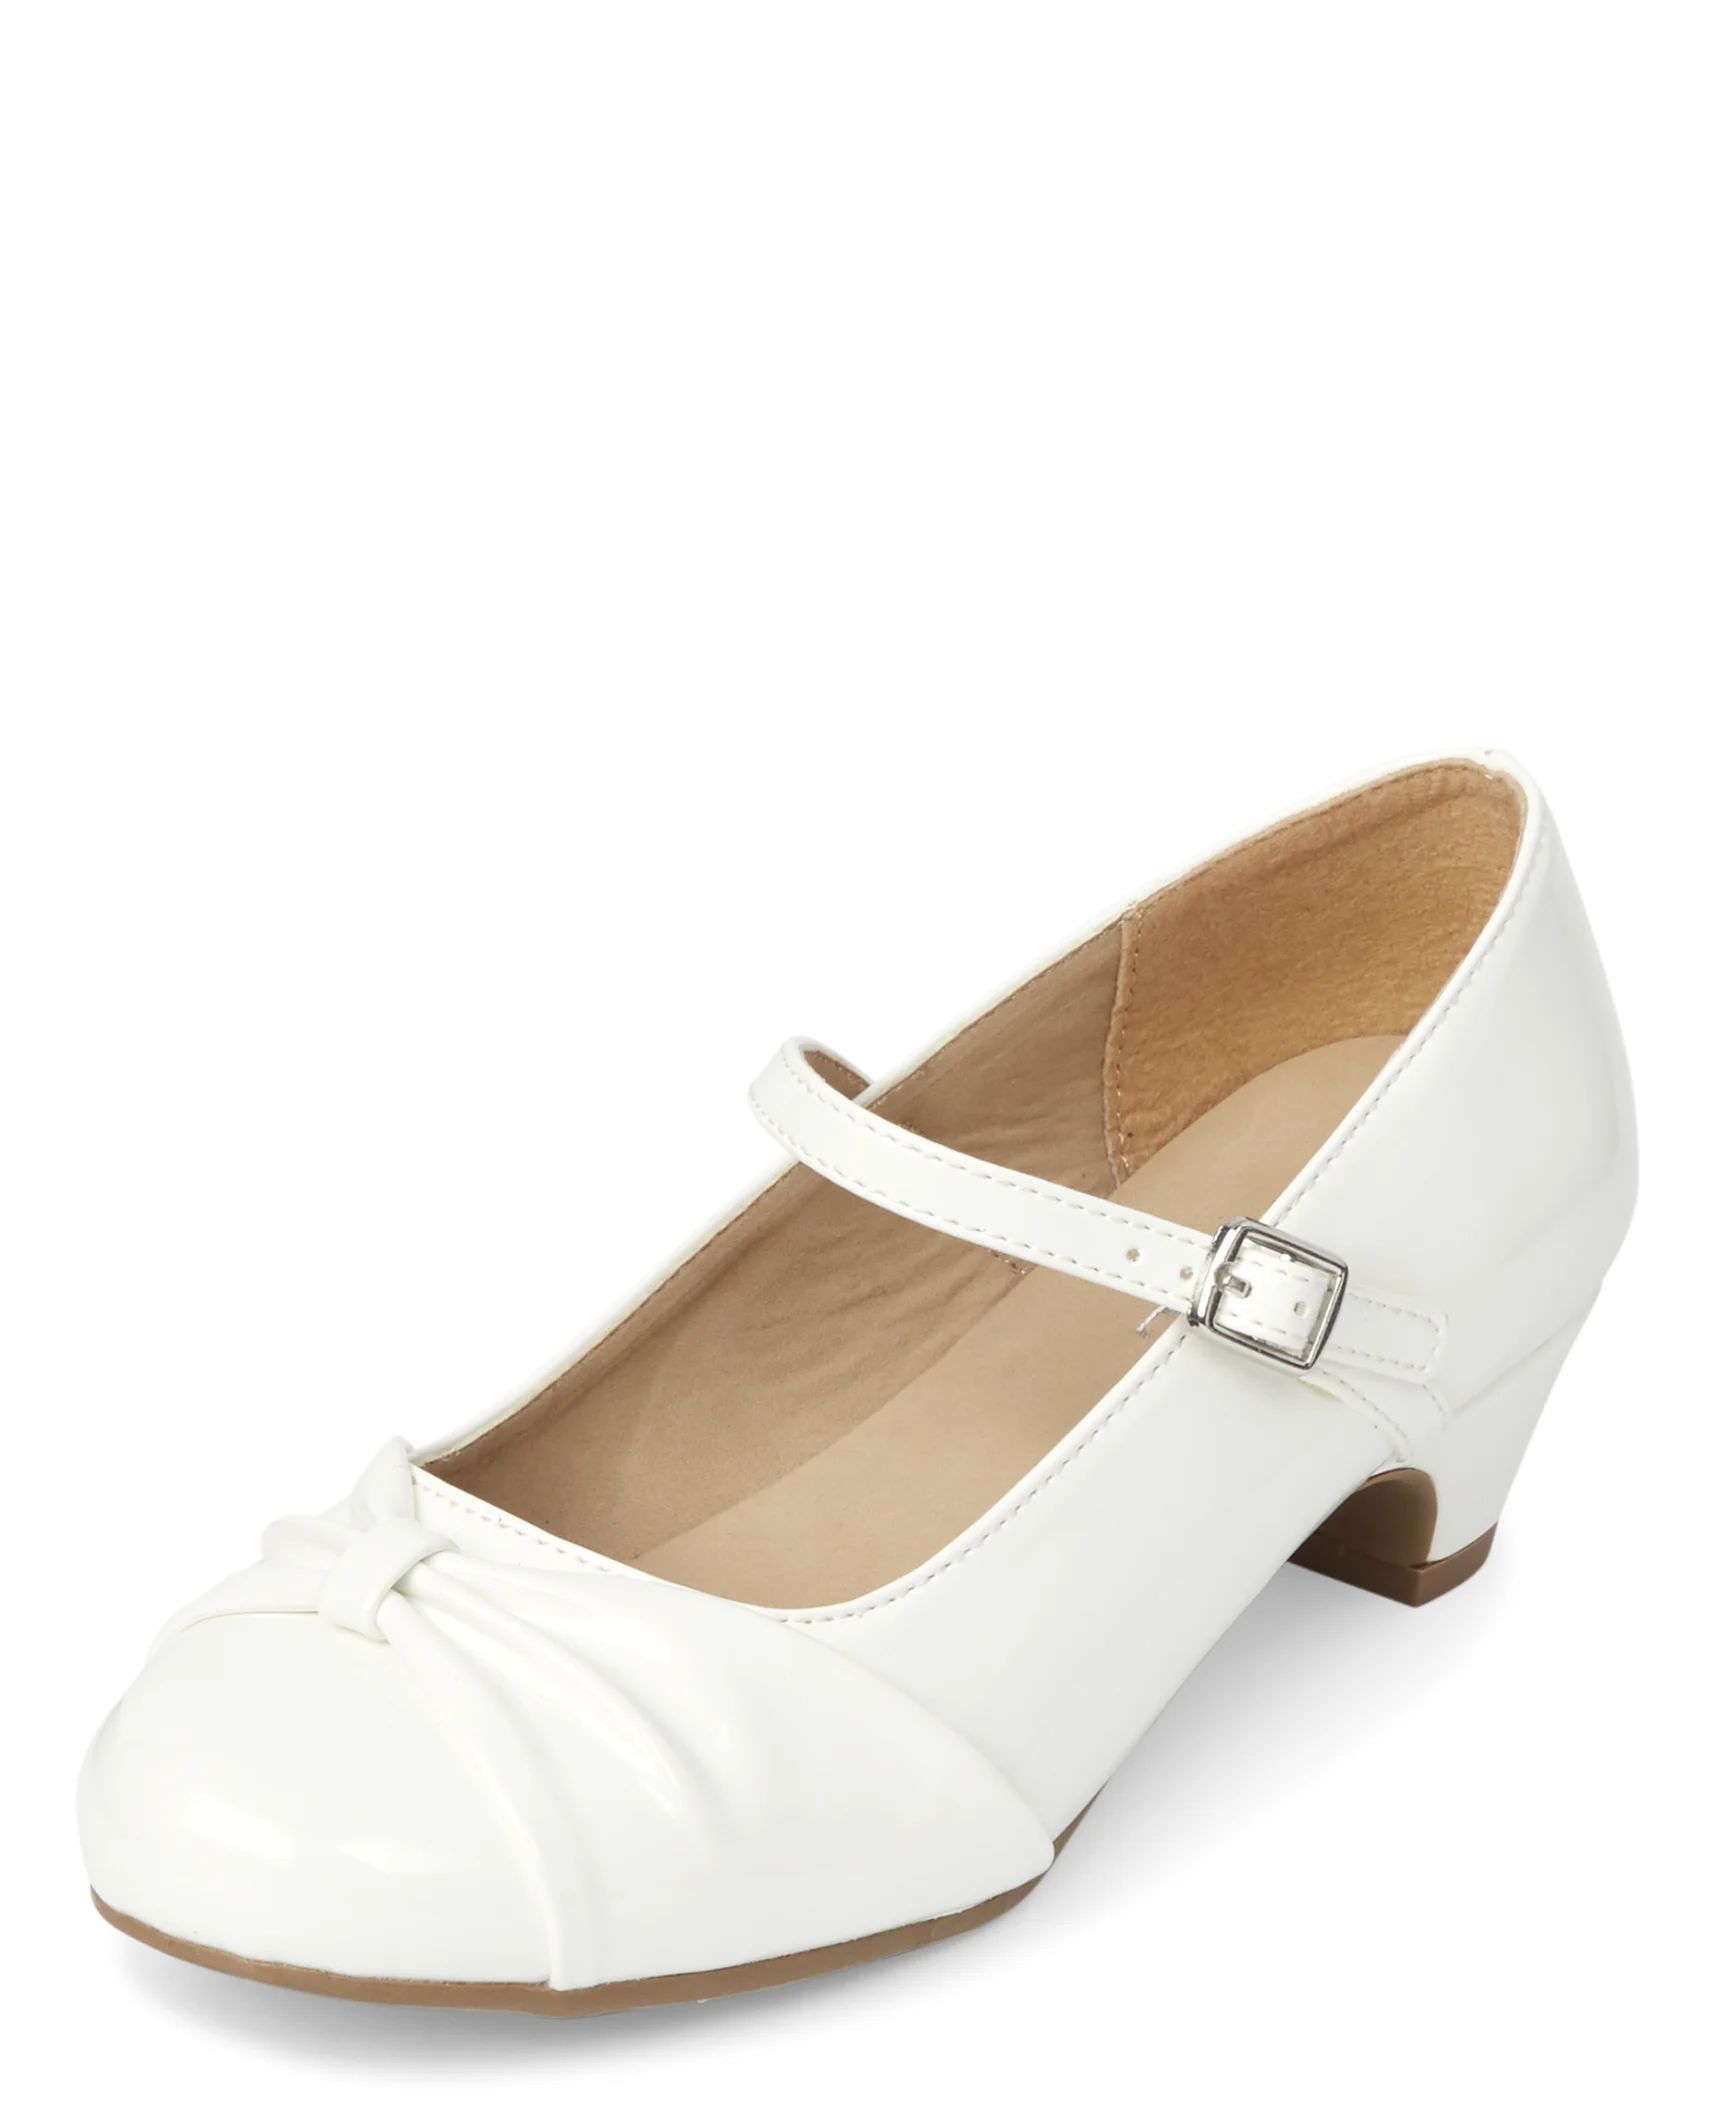 Girls Low Heel Shoes - white | The Children's Place